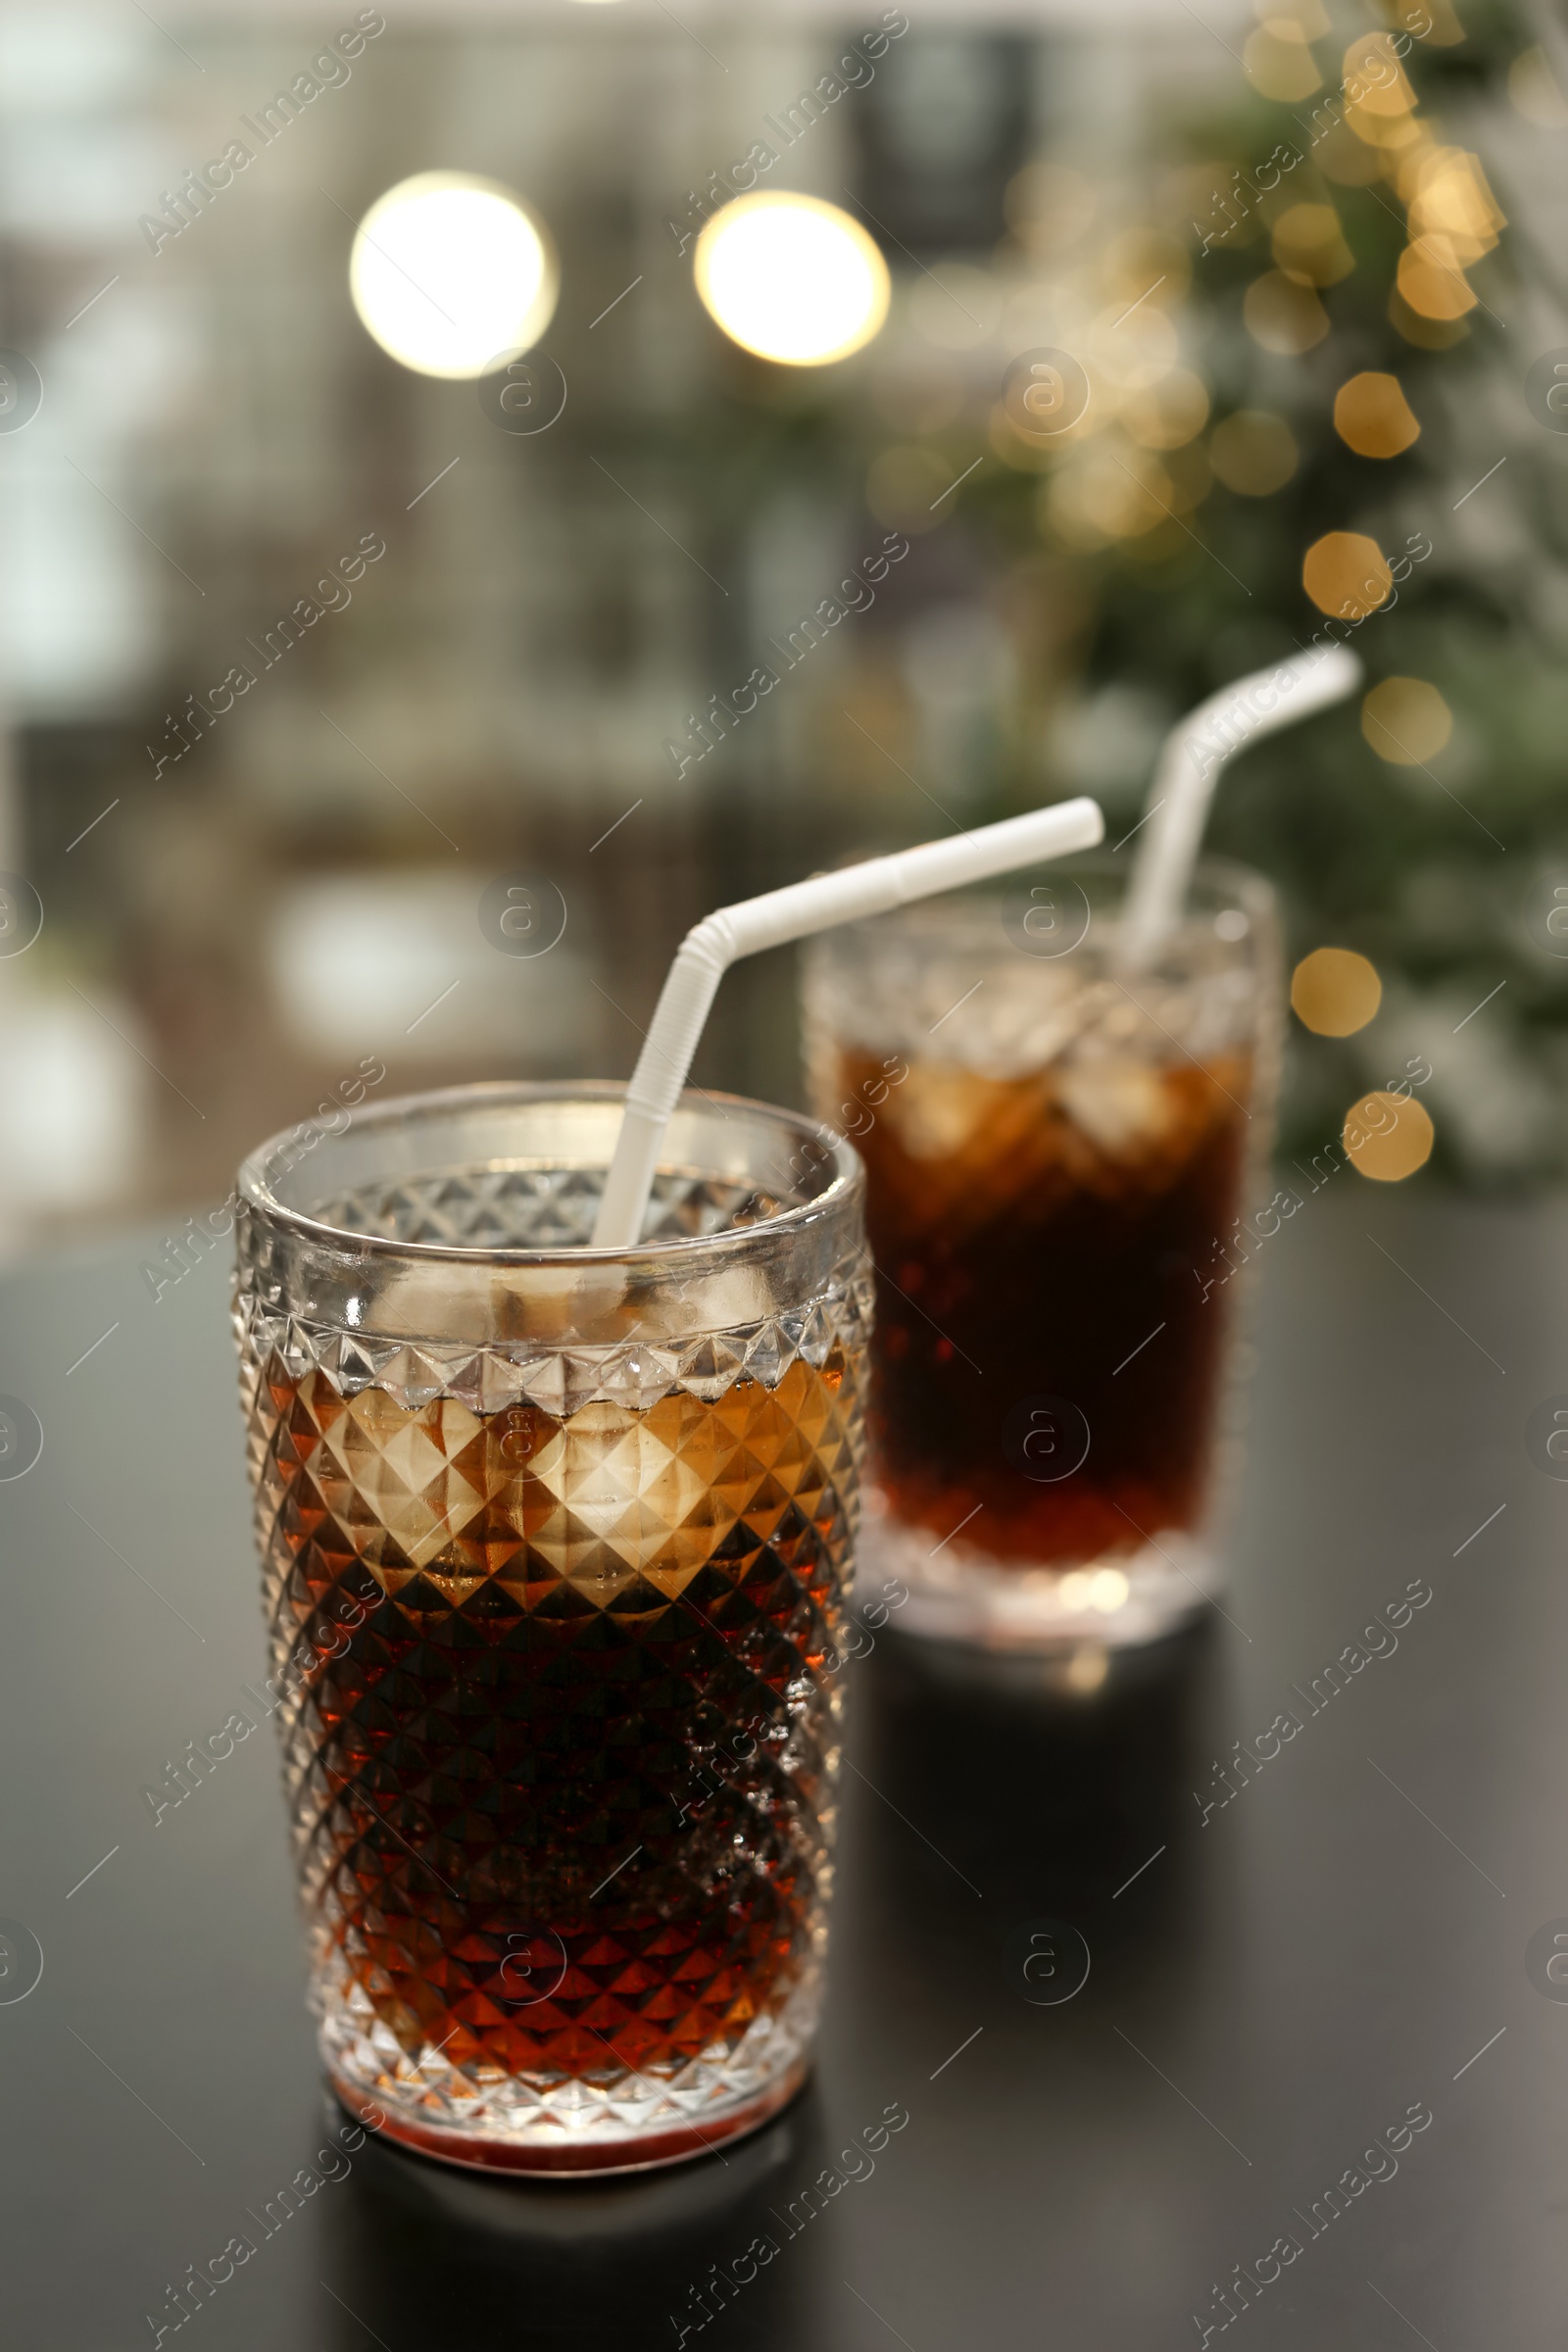 Photo of Glasses of cold cola on table against blurred background